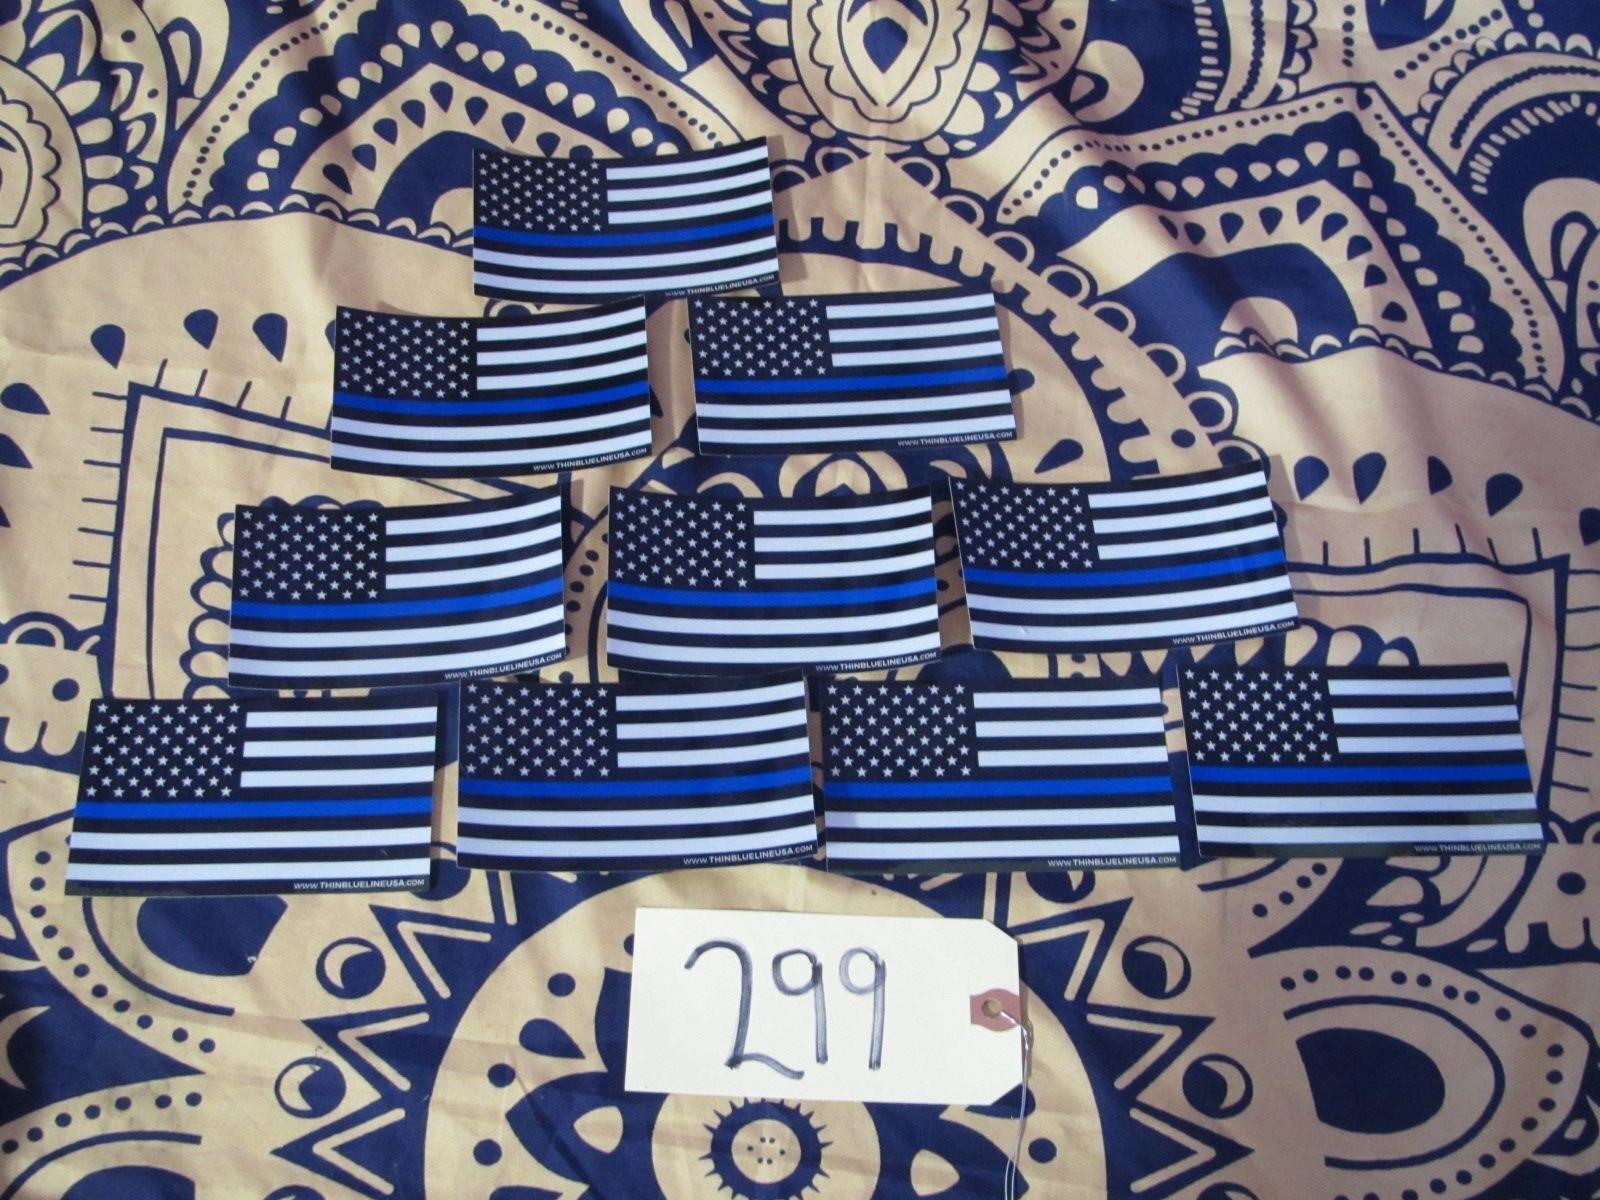 QTY 10 Thin Blue Line Police Support Flag Stickers